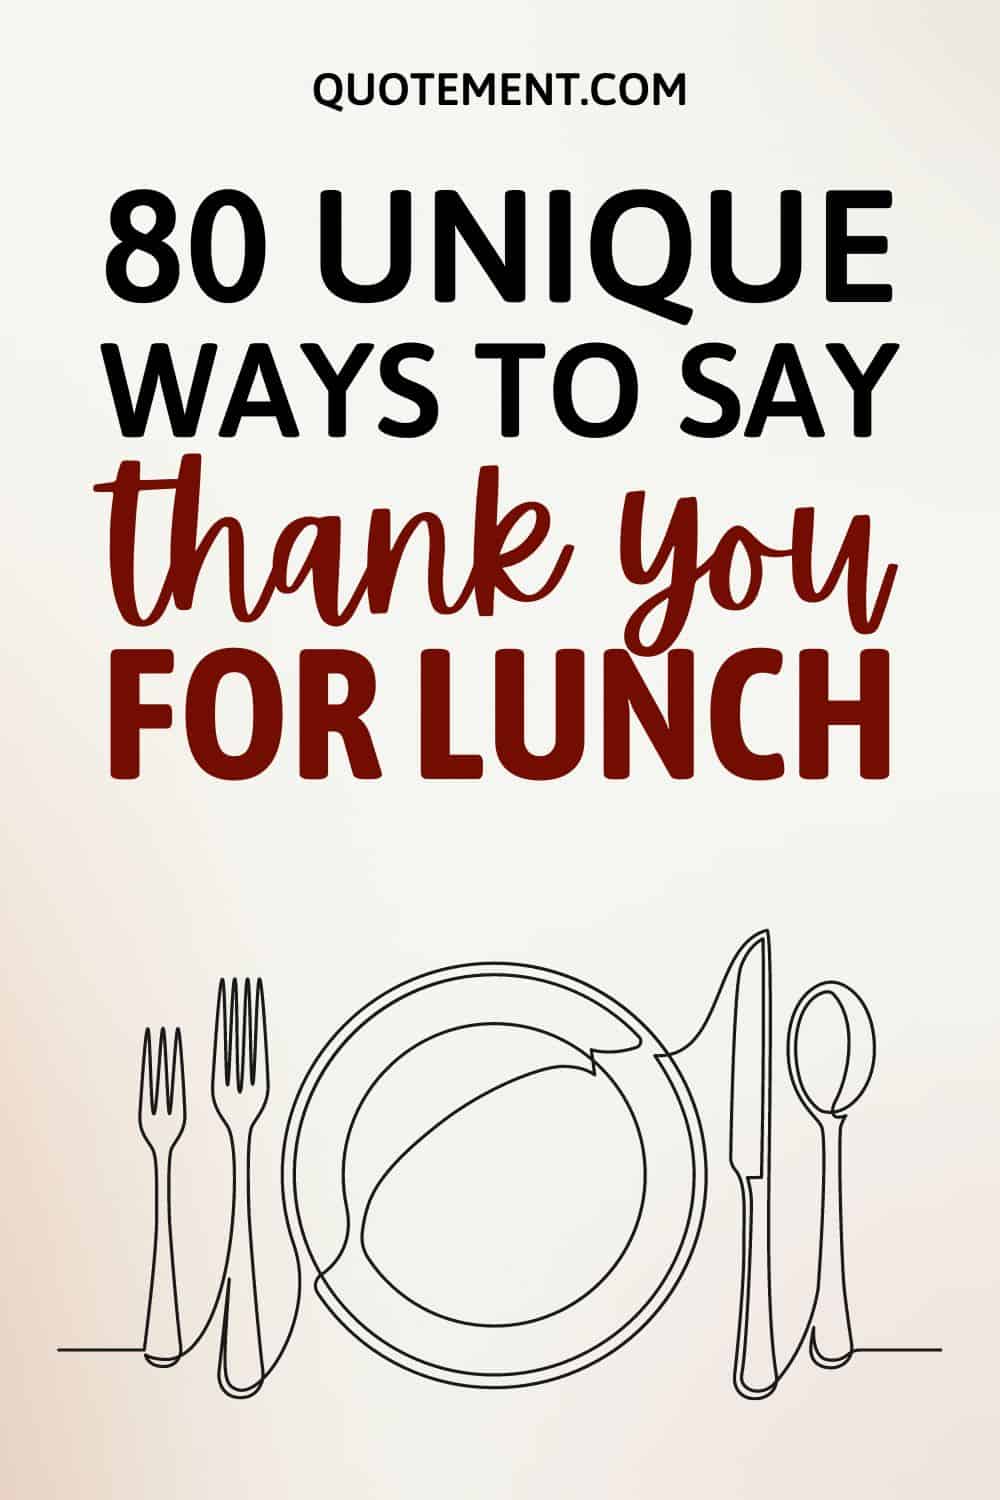 80 Amazing Ways To Say Thank You For Lunch To Check Out
